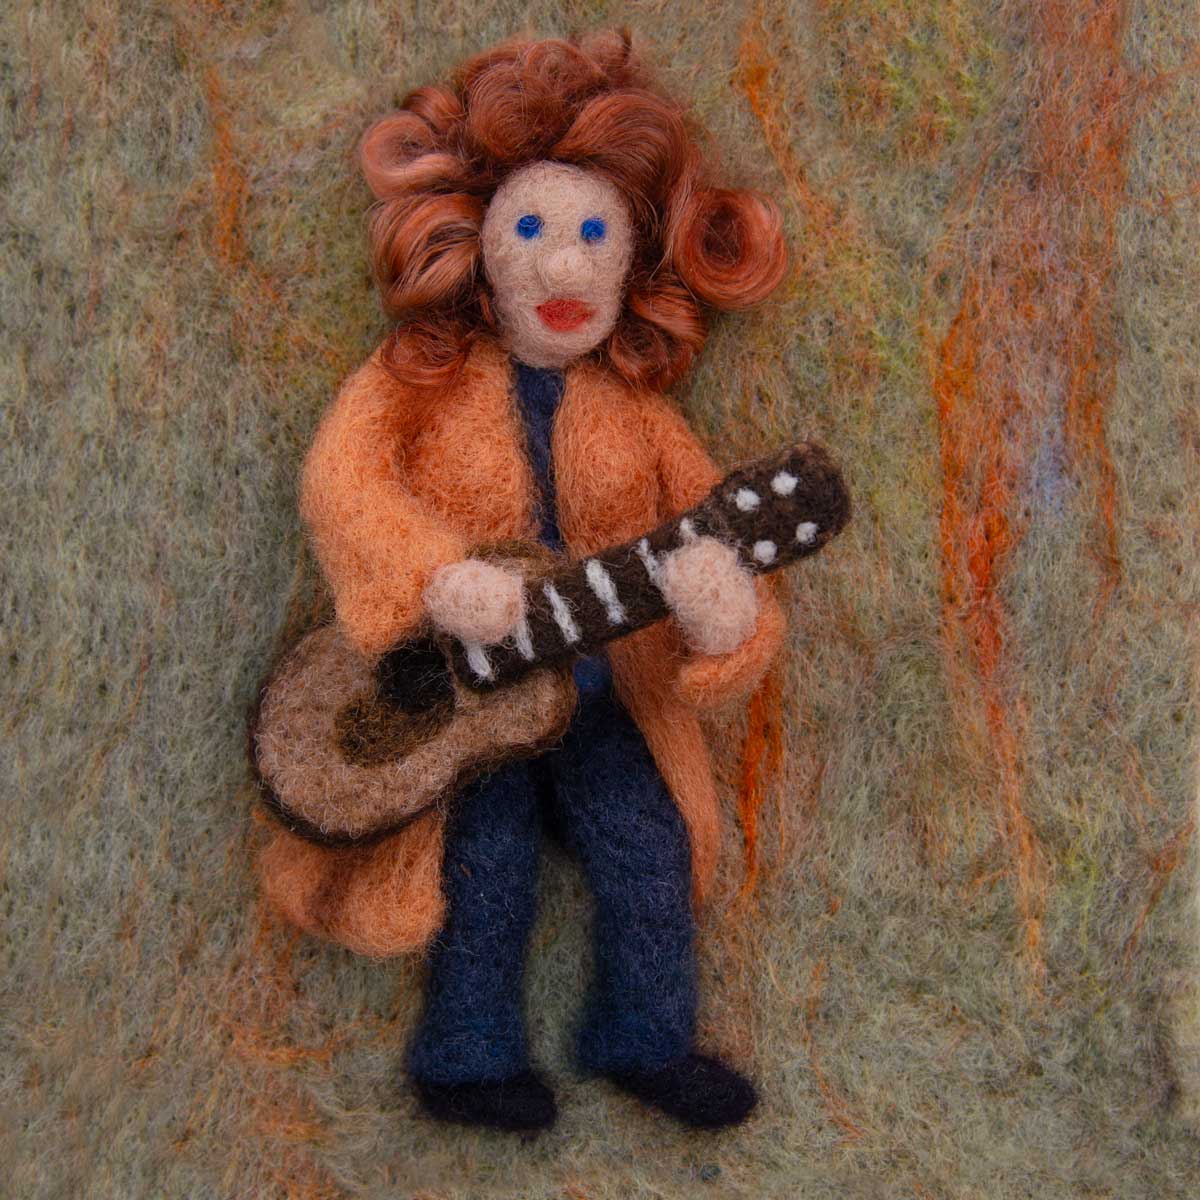 Musician - Needle Felted Illustration for Hillary Dow's ABC picture book